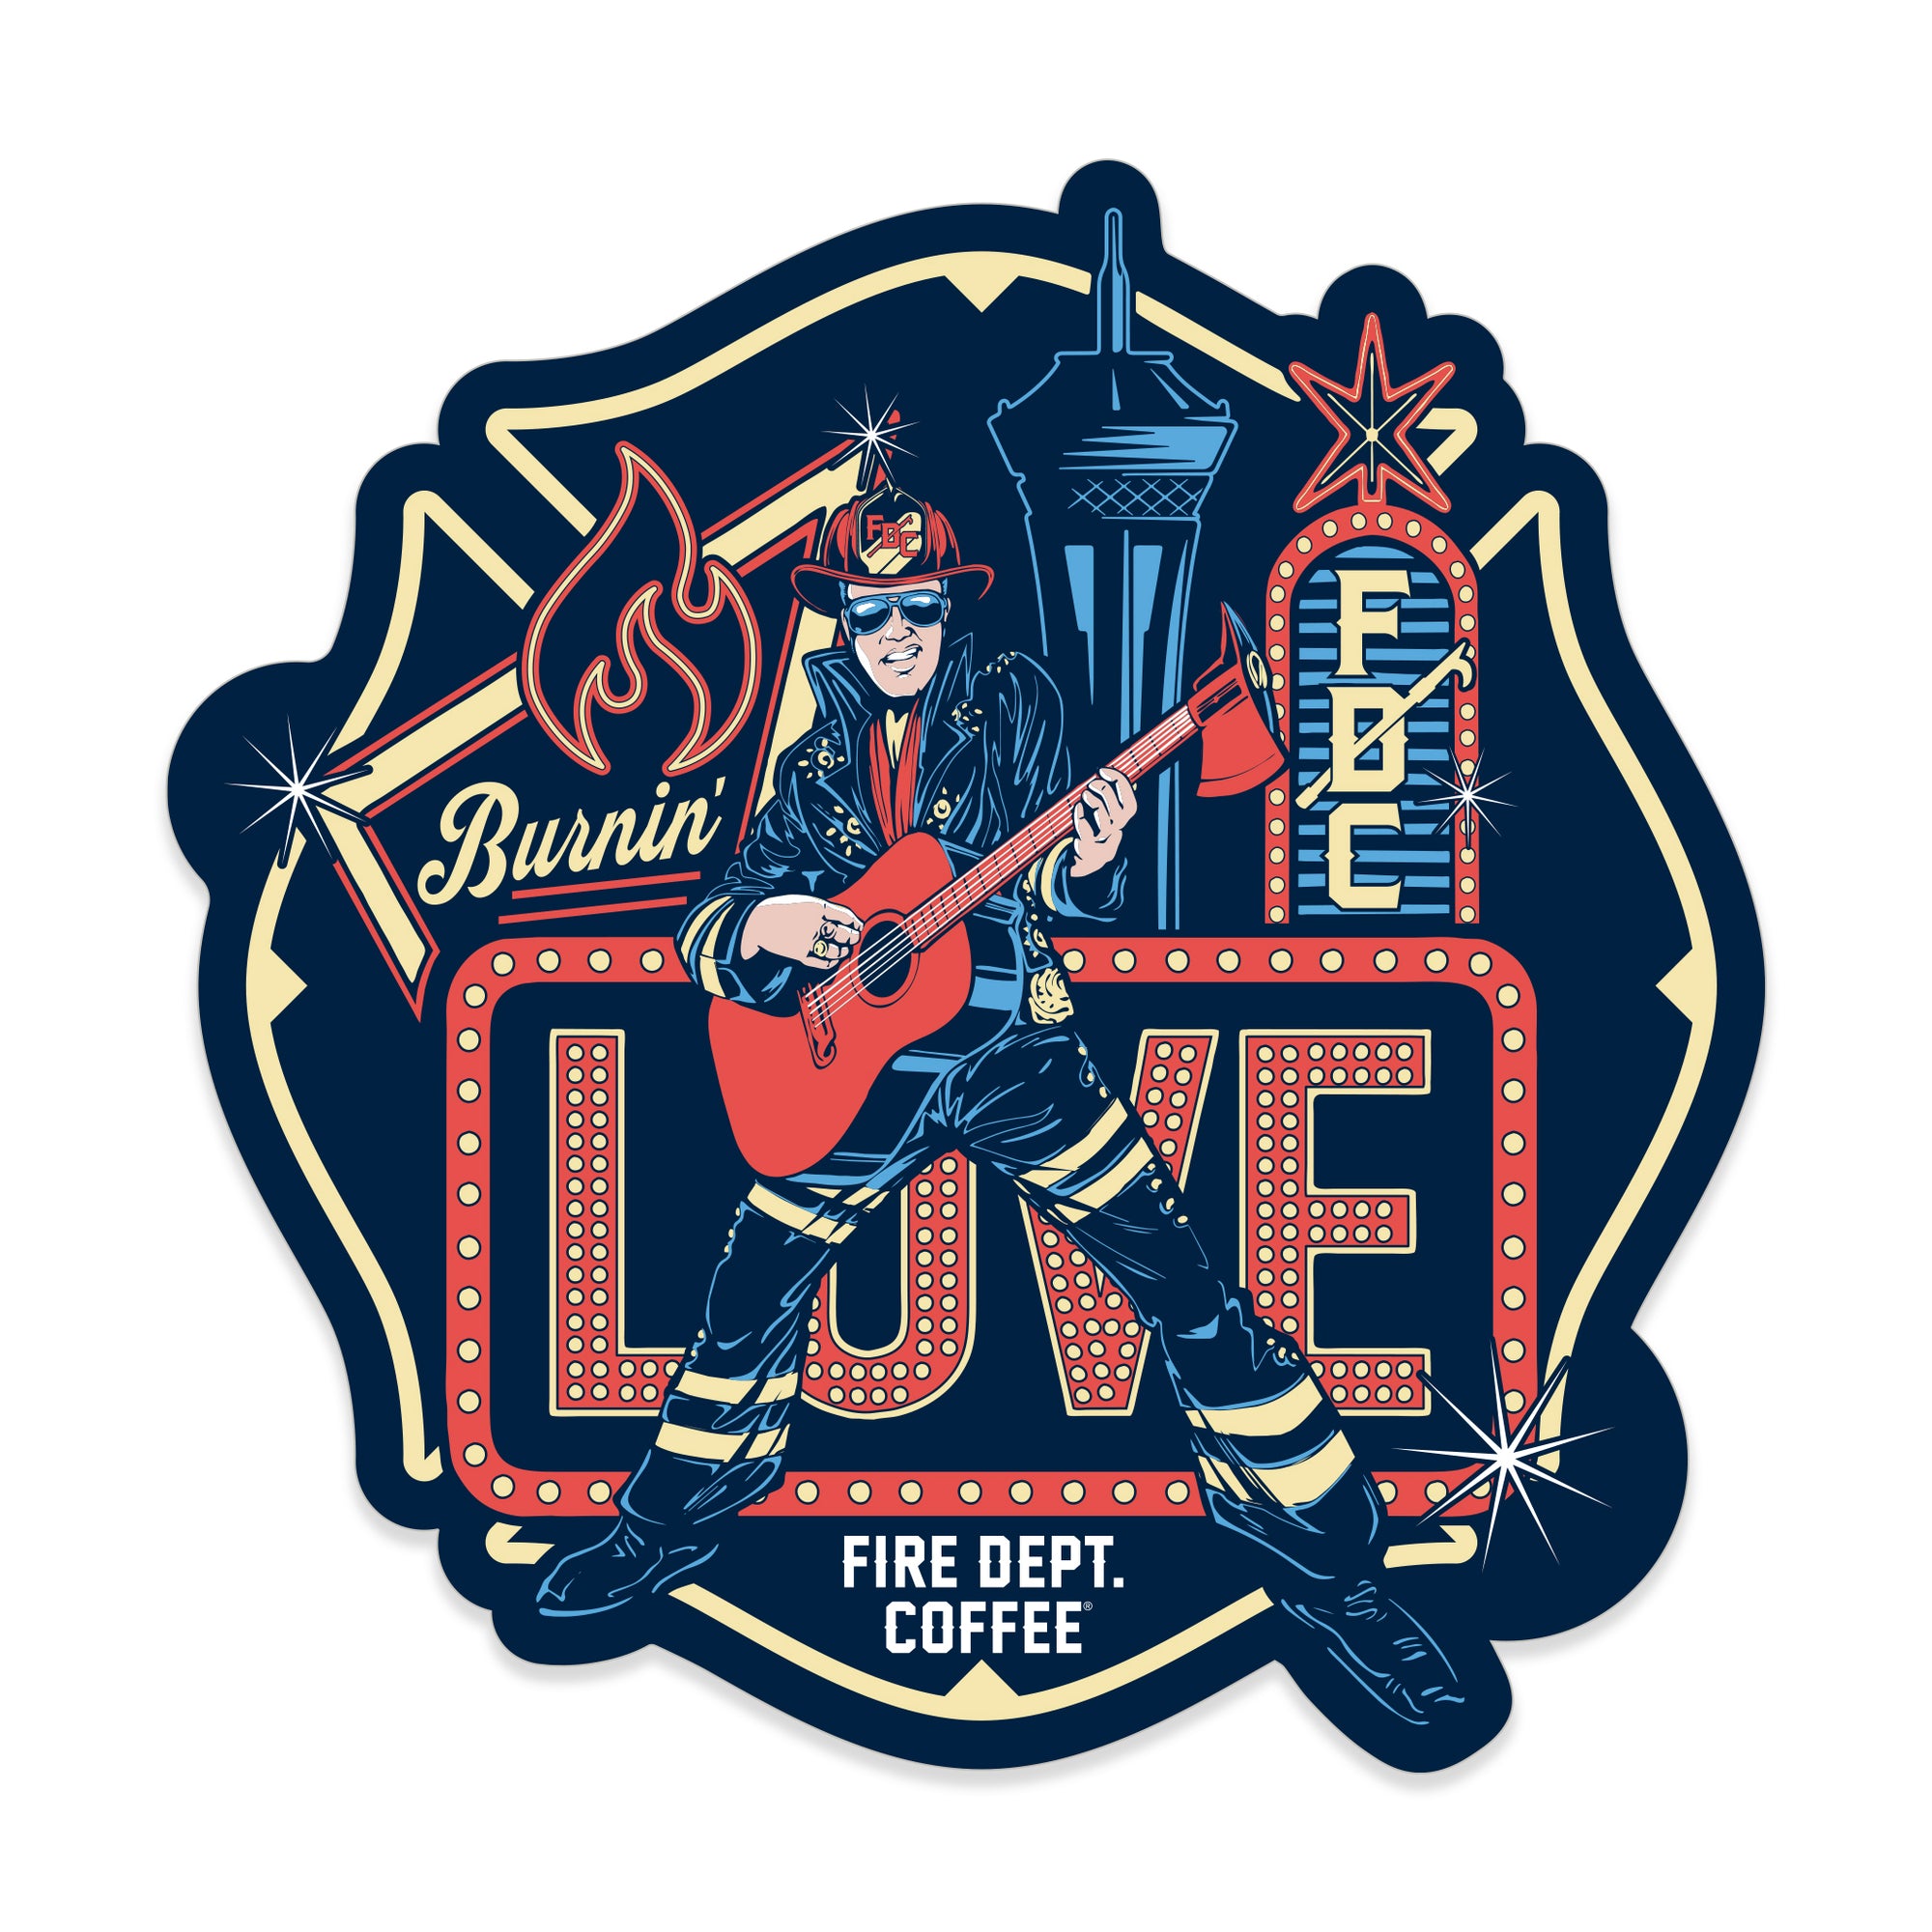 This sticker features a firefighter playing a guitar in from of Las Vegas-inspired illustrations.